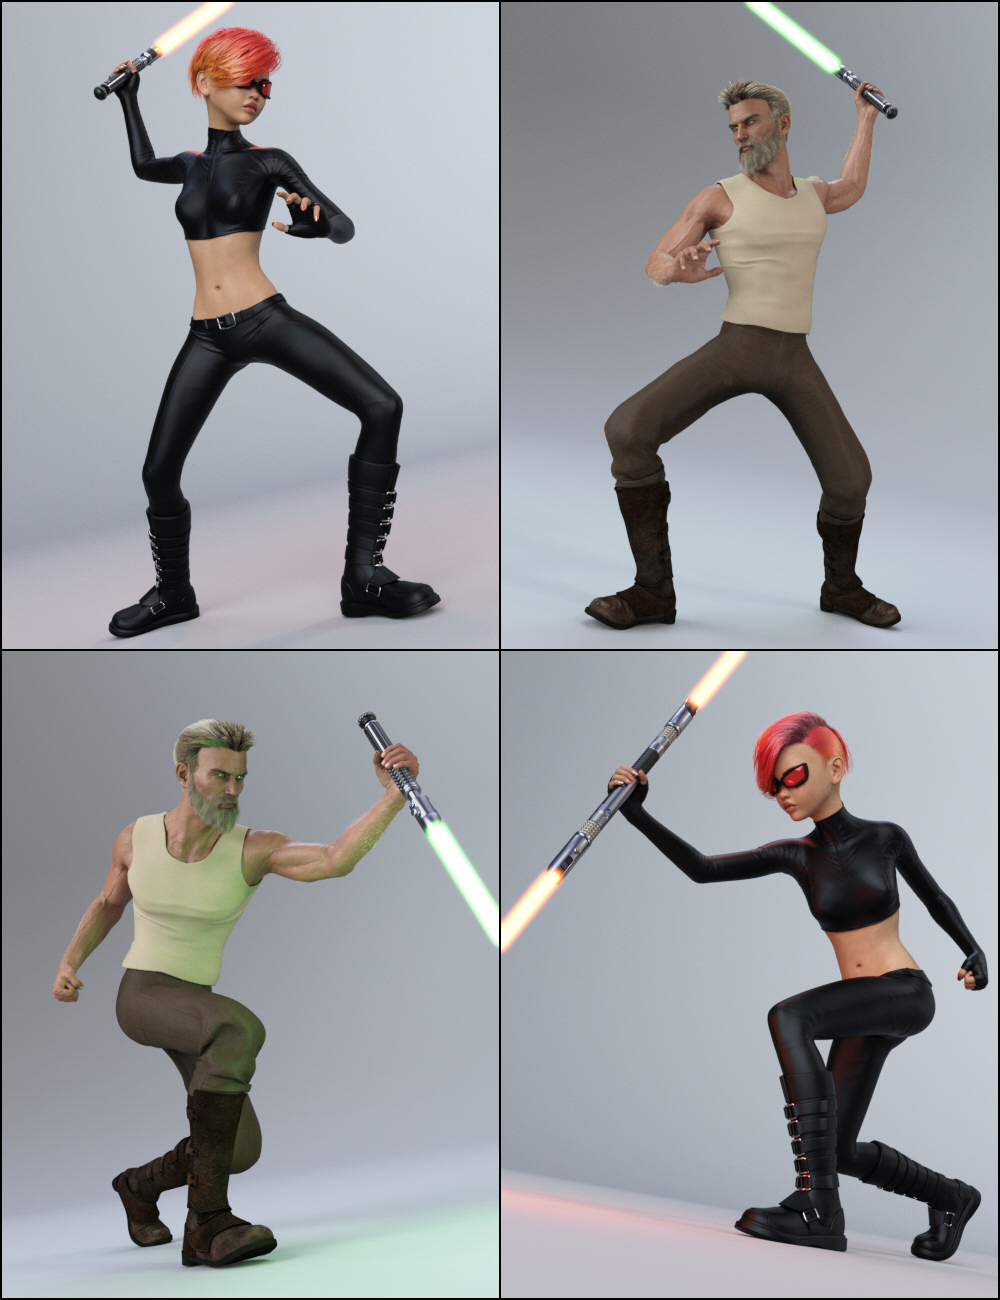 The Universal Weapons Prop and Poses for Genesis 3 and 8 by: Mattymanx, 3D Models by Daz 3D